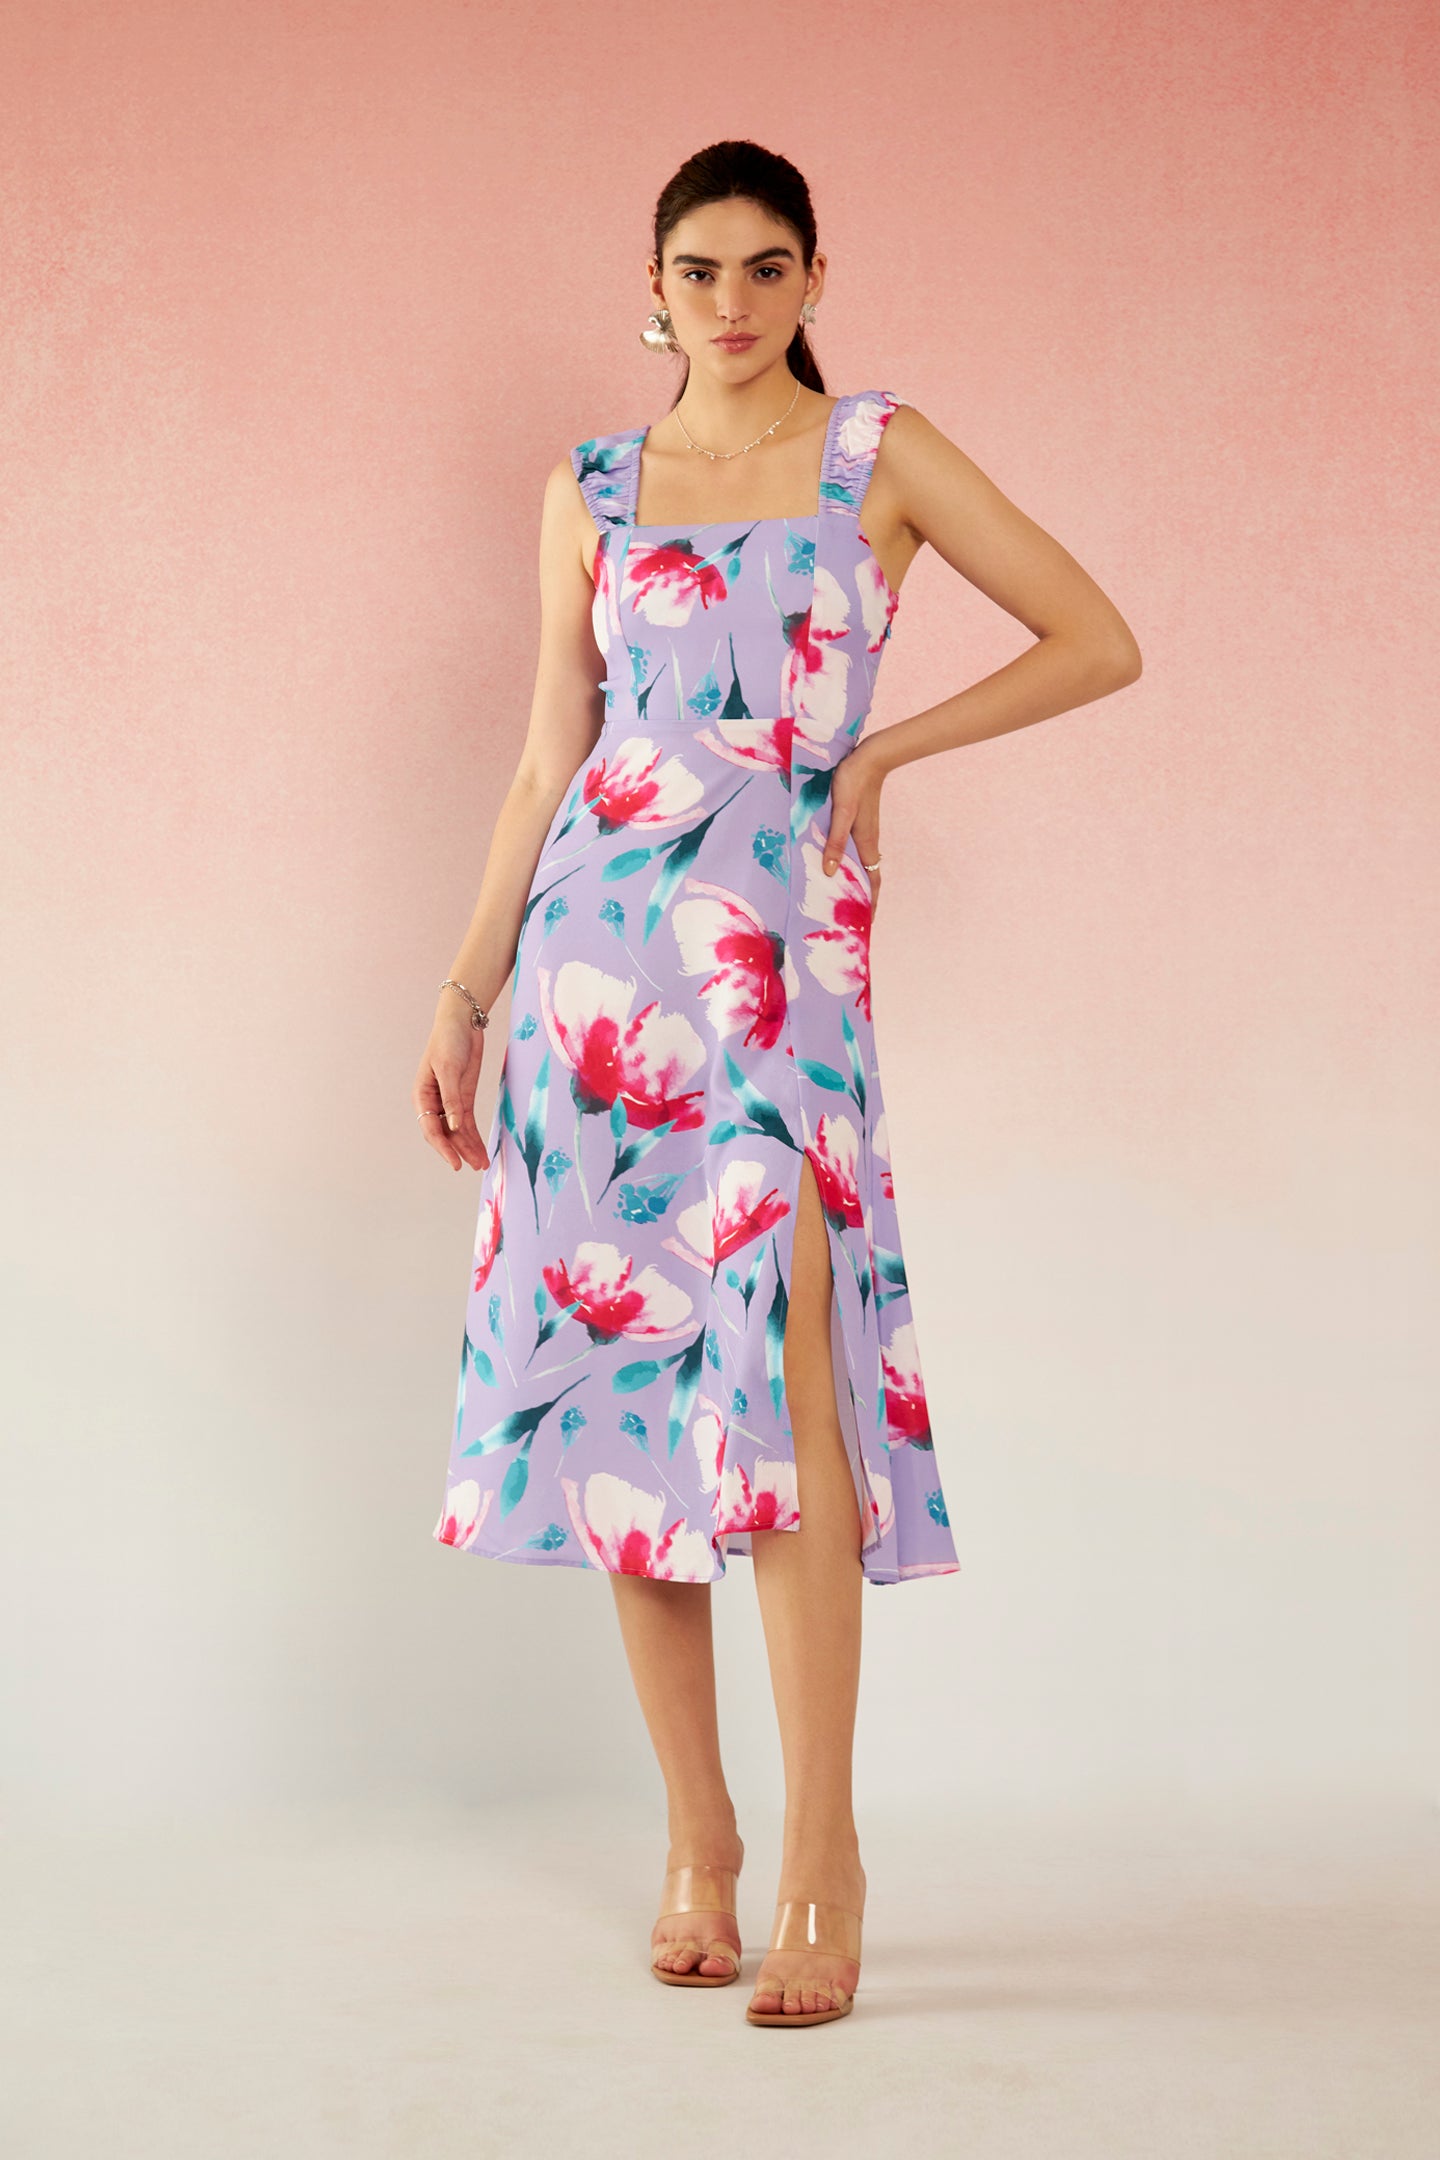 Lillian|Classy Recycled Polyester Strappy Floral Dress